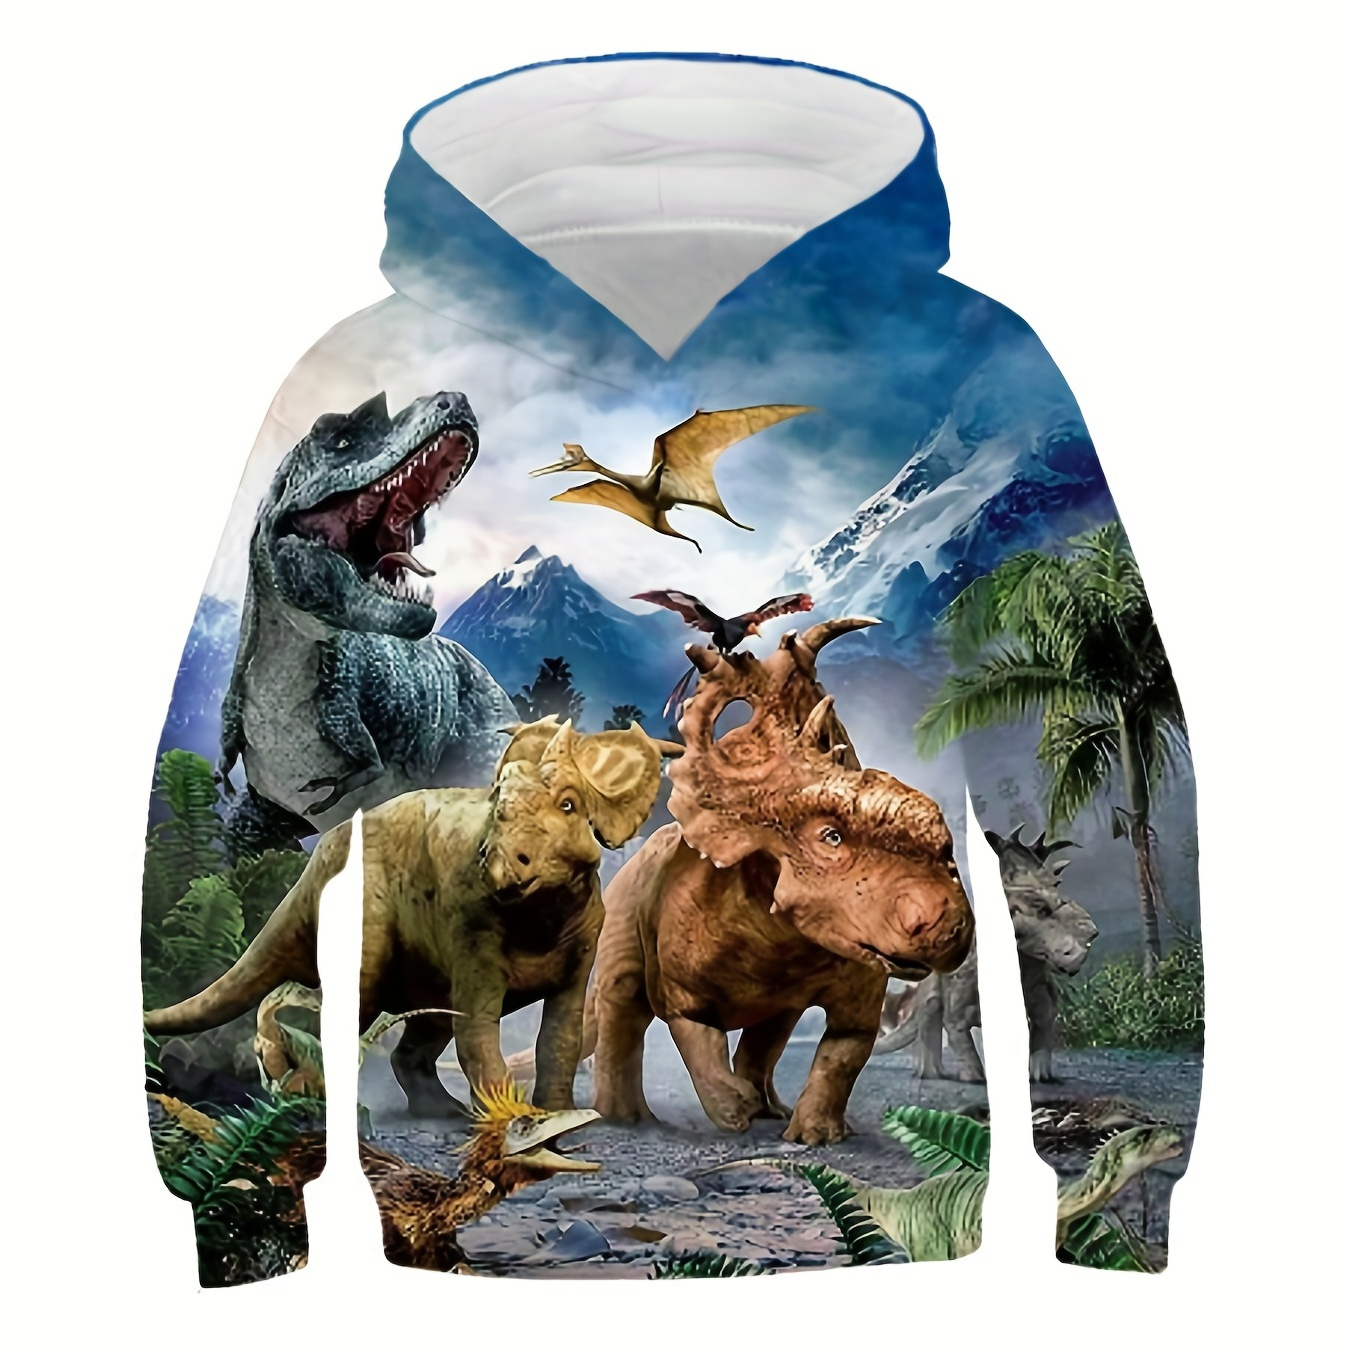 

Girls/ Boys Pullover 3d Dinosaur Graphic Hooded Drop Shoulder Sweatshirt Tops For Children Kids Fall Outfit, Gift Idea